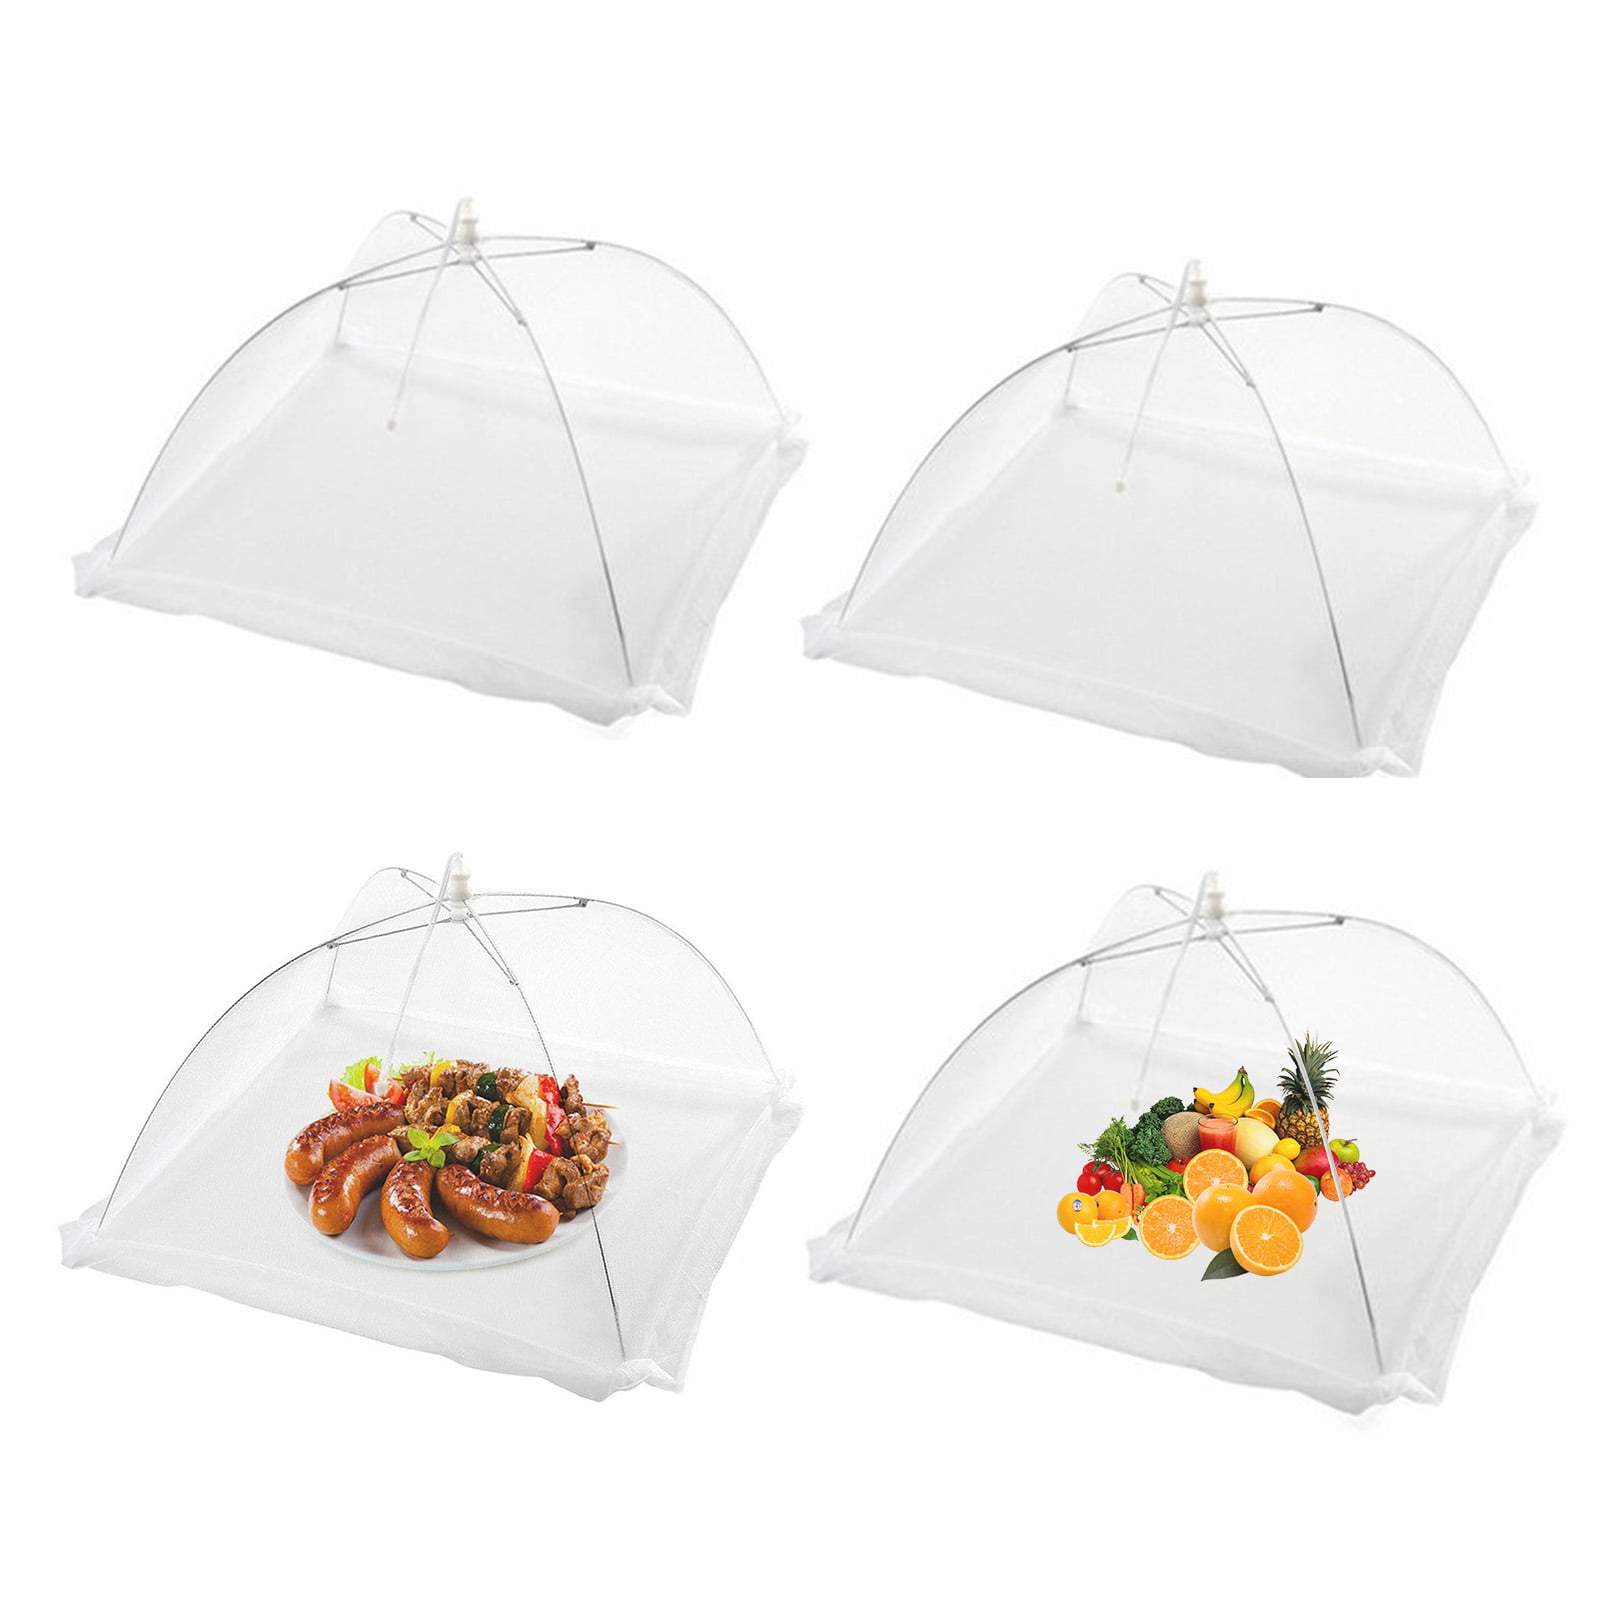 Details about   Mesh Screen Food Cover Tents Set of 4 Umbrella Screens to Keep Bugs And Flies 